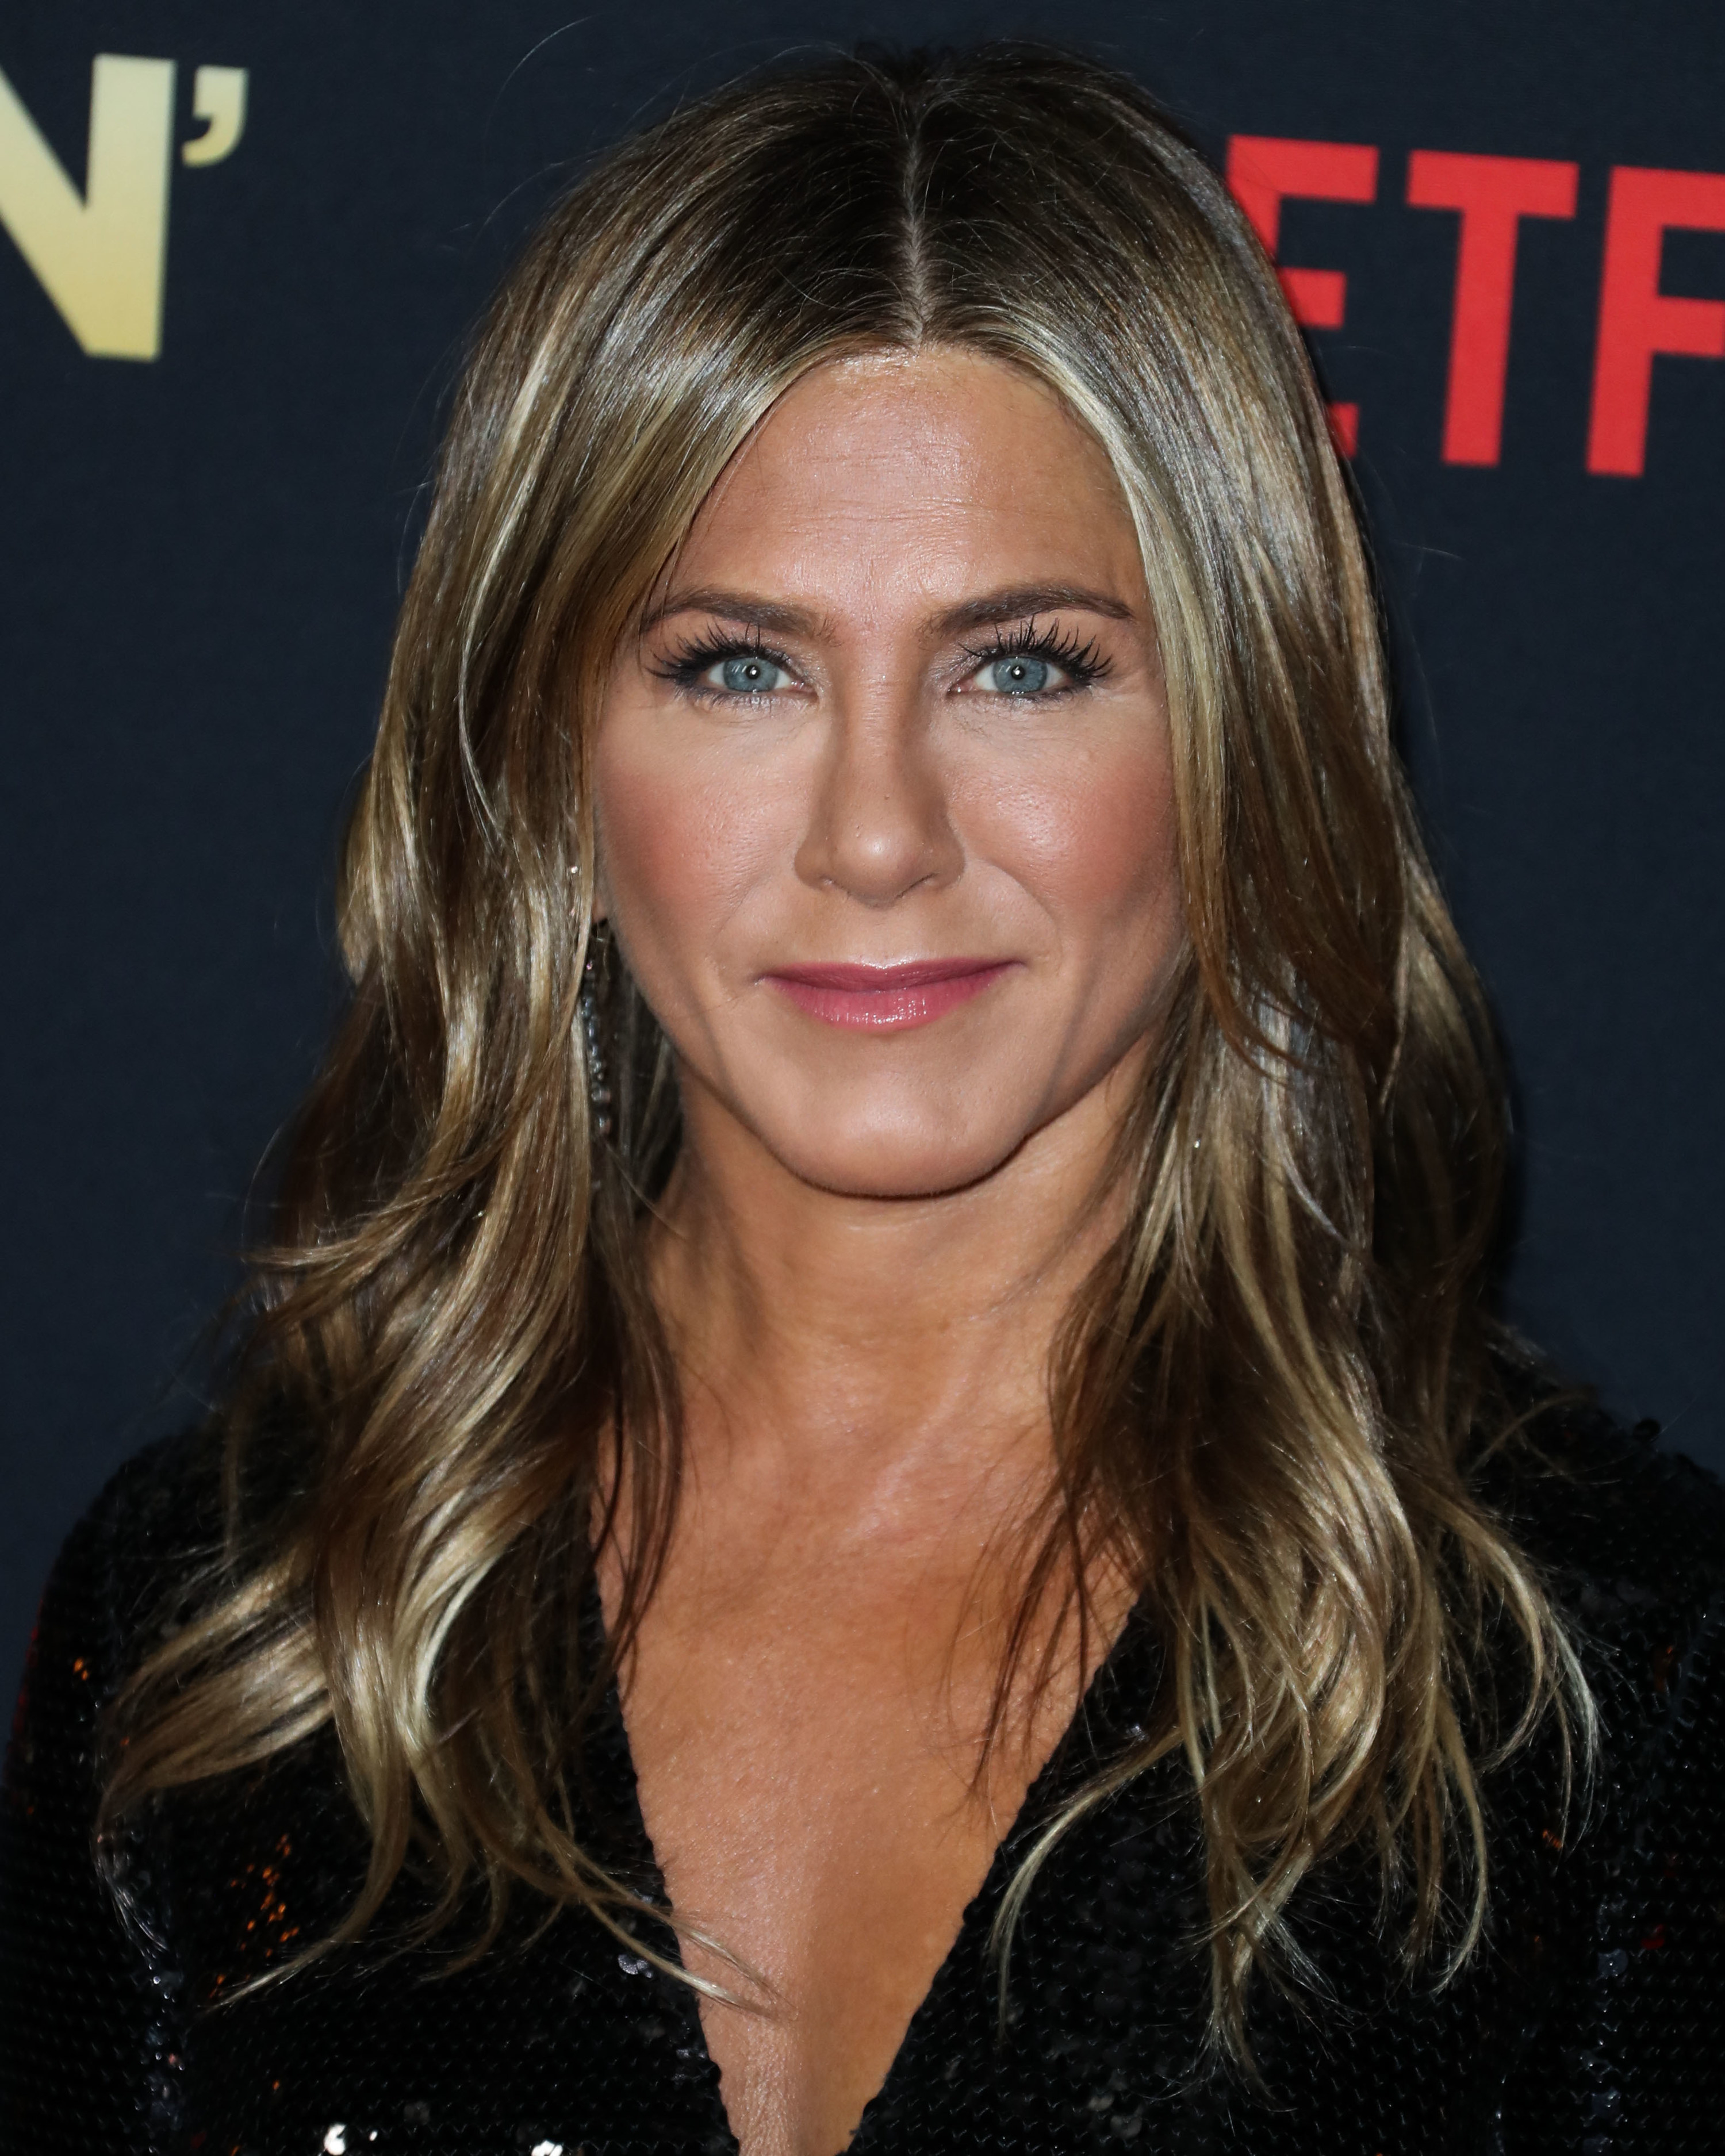 Jennifer Aniston Said She Only Joined Instagram To Promote Her New TV Show